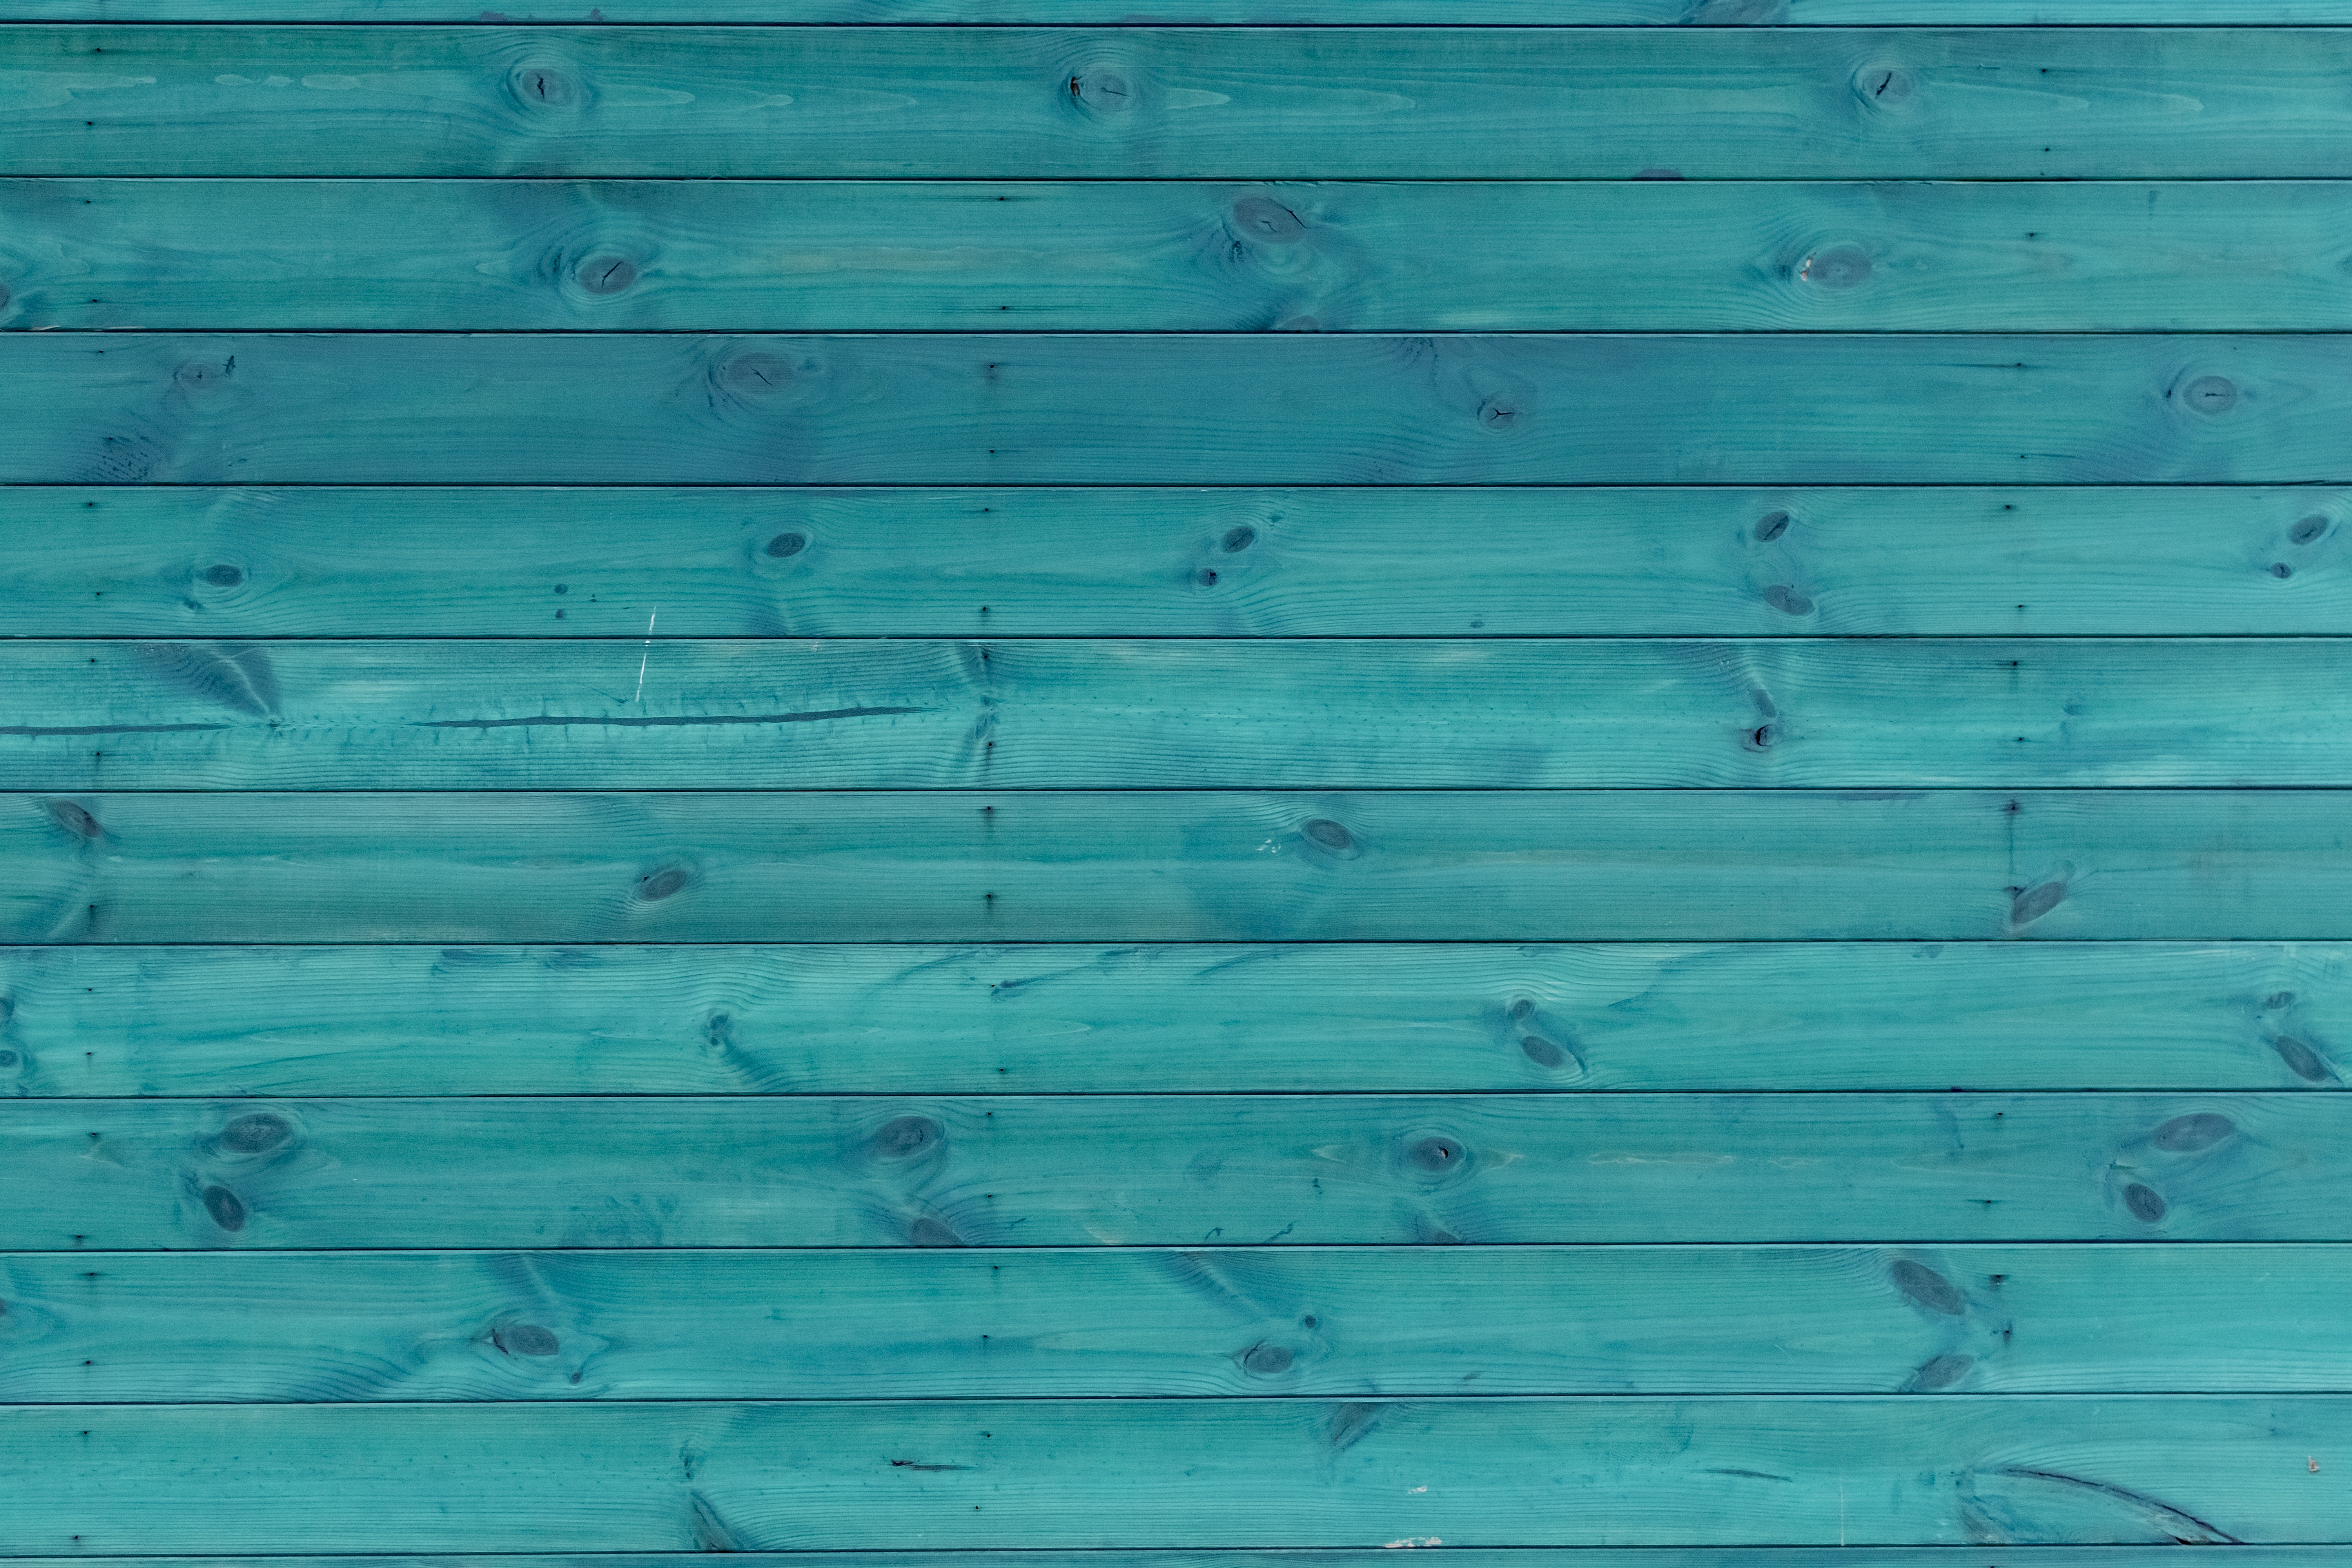 textures, wooden, horizontal, planks, board, wood, texture, wall